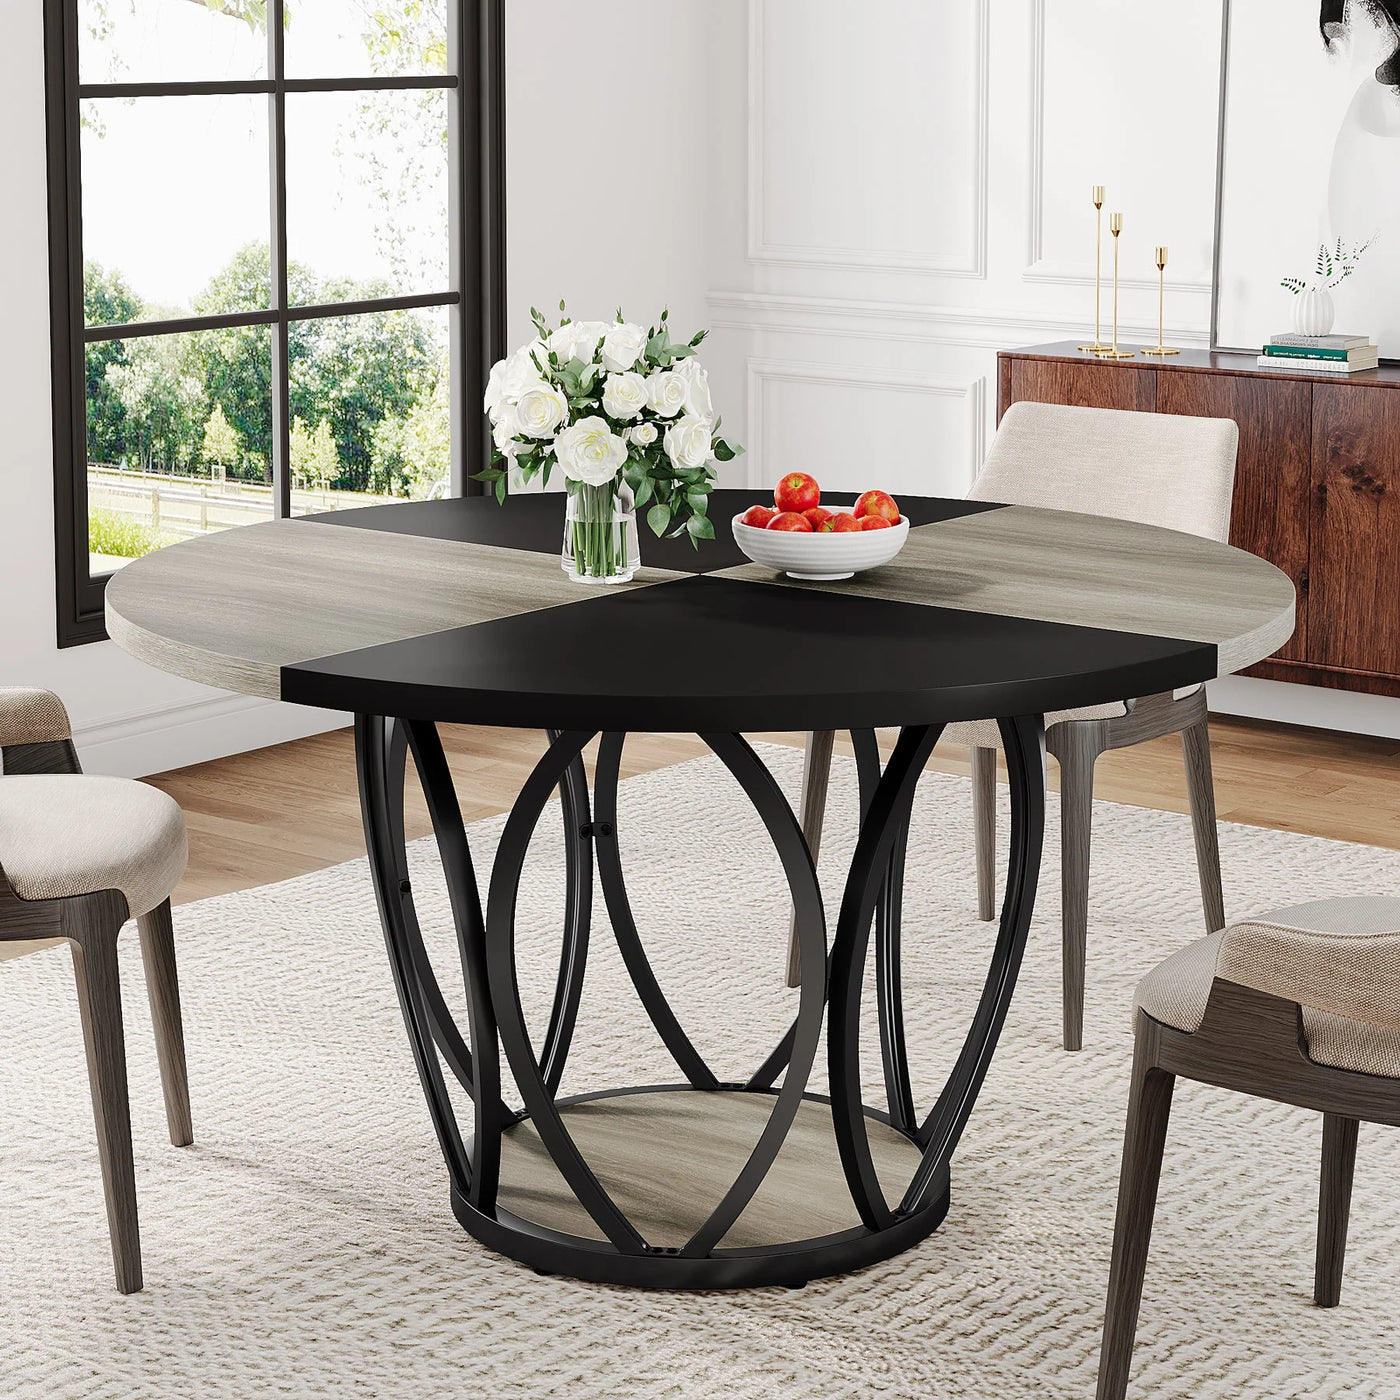 Caris 47" Dining Table | Wood Black Round Circular Kitchen Table Metal Base for 4-6